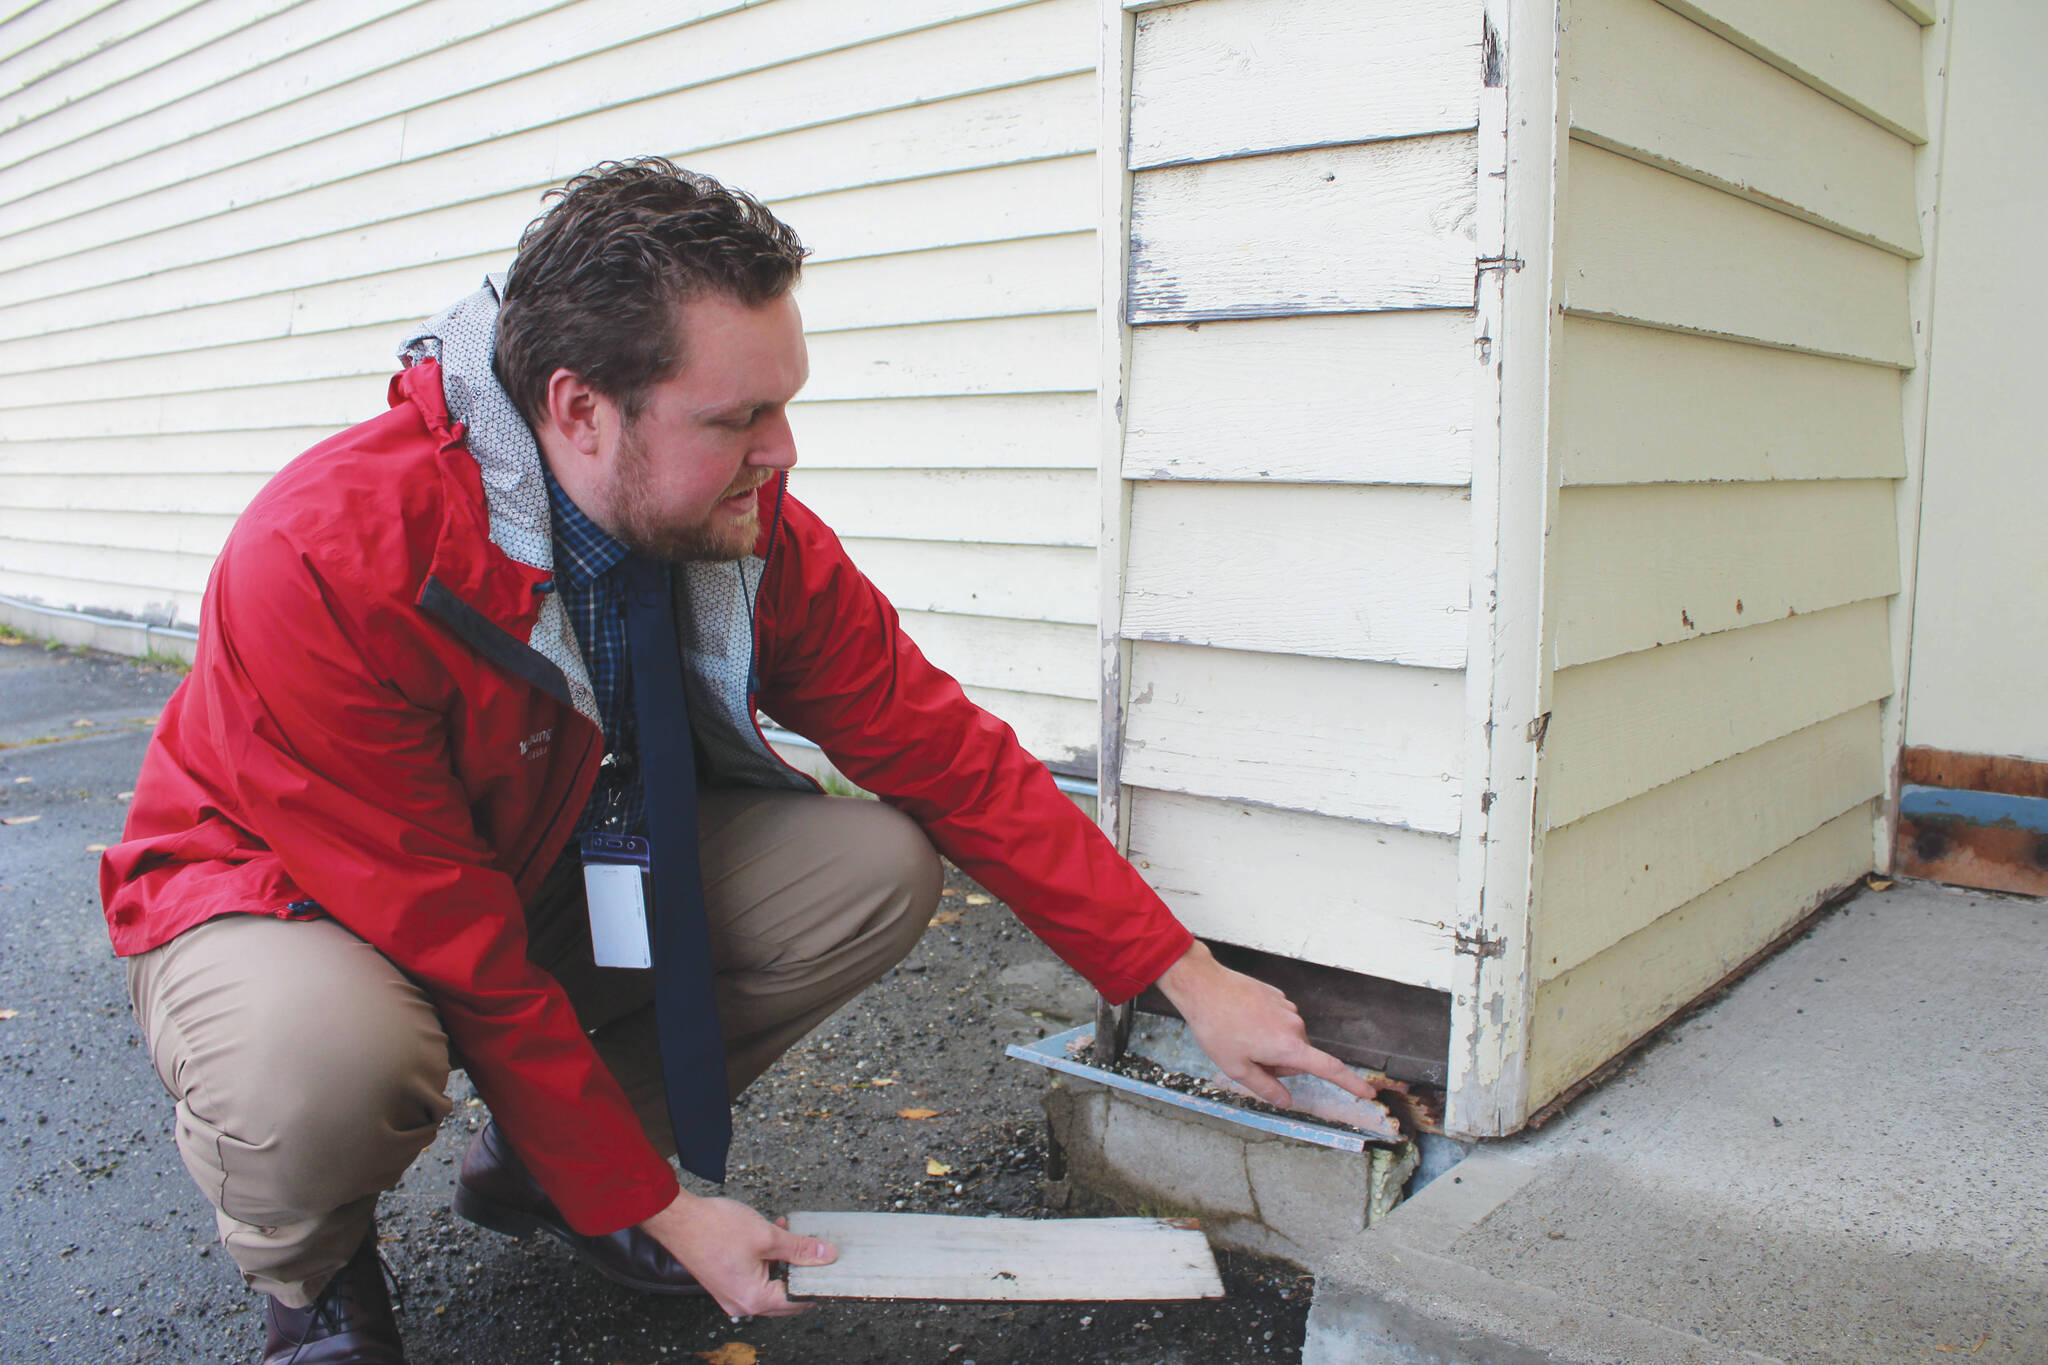 Soldotna Elementary School Principal Dr. Austin Stevenson points out corroded insulation outside of the school building on Friday, Sept. 30, 2022 in Soldotna . (Ashlyn O’Hara/Peninsula Clarion)